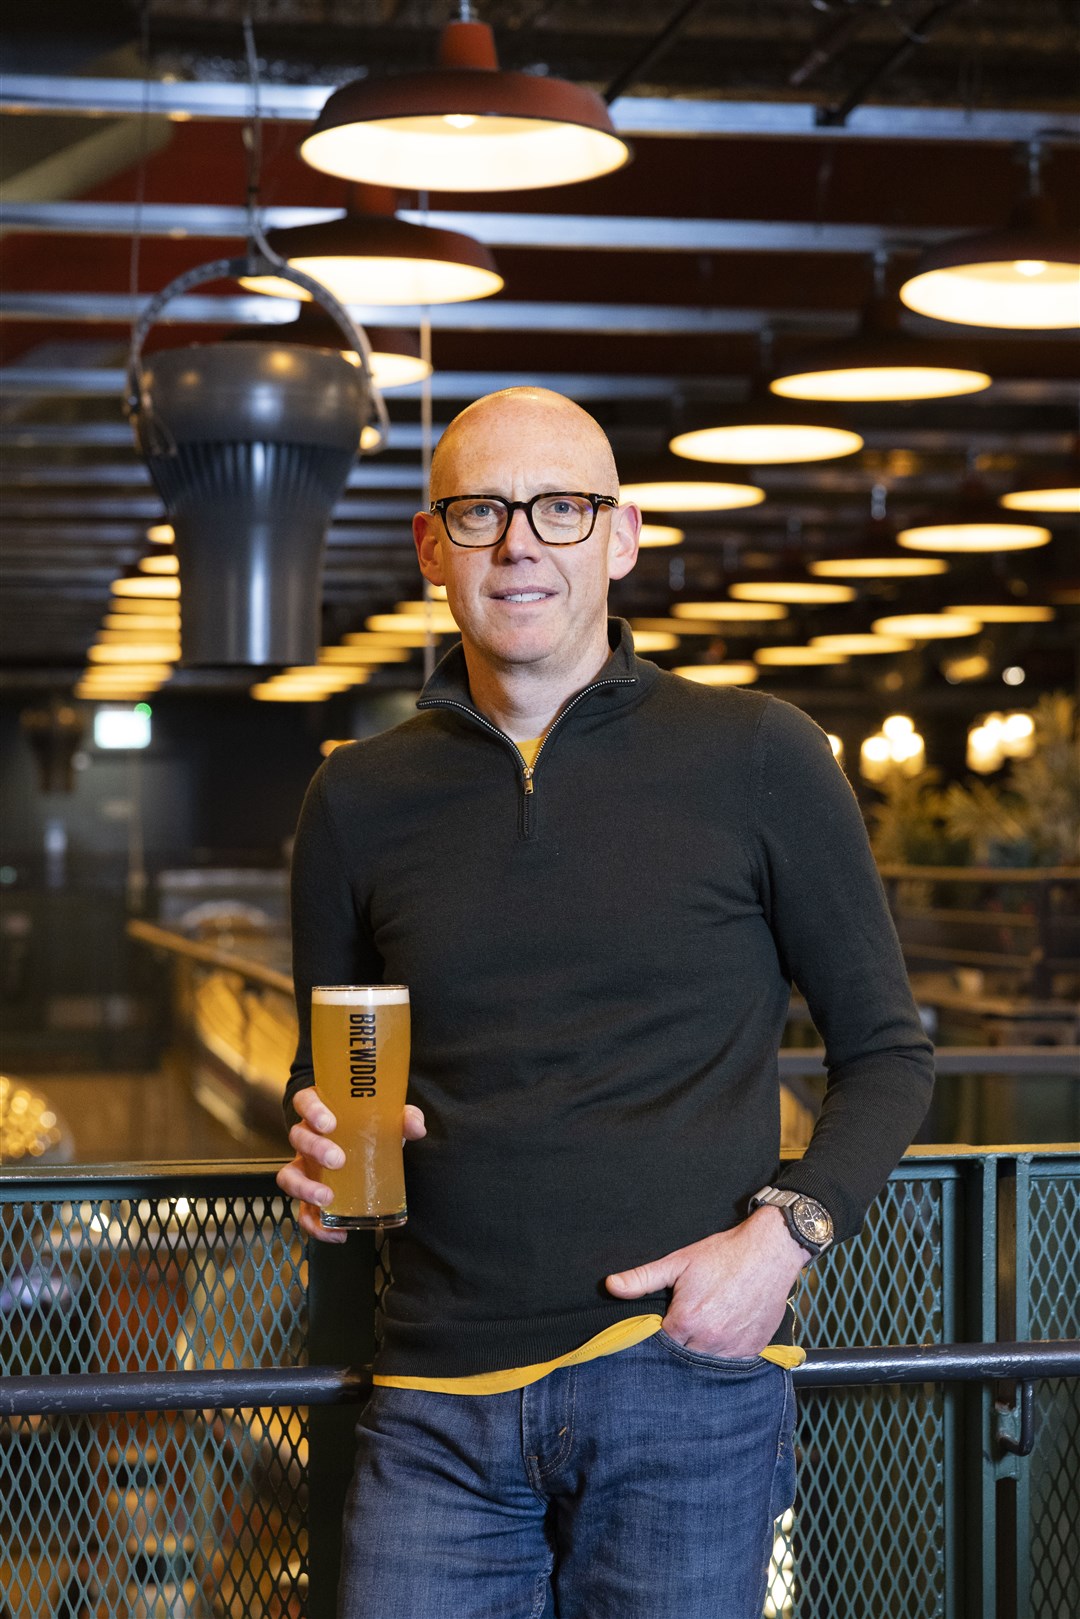 New BrewDog boss James Arrow was hired last year as chief operating officer as part of succession planning (BrewDog/PA)